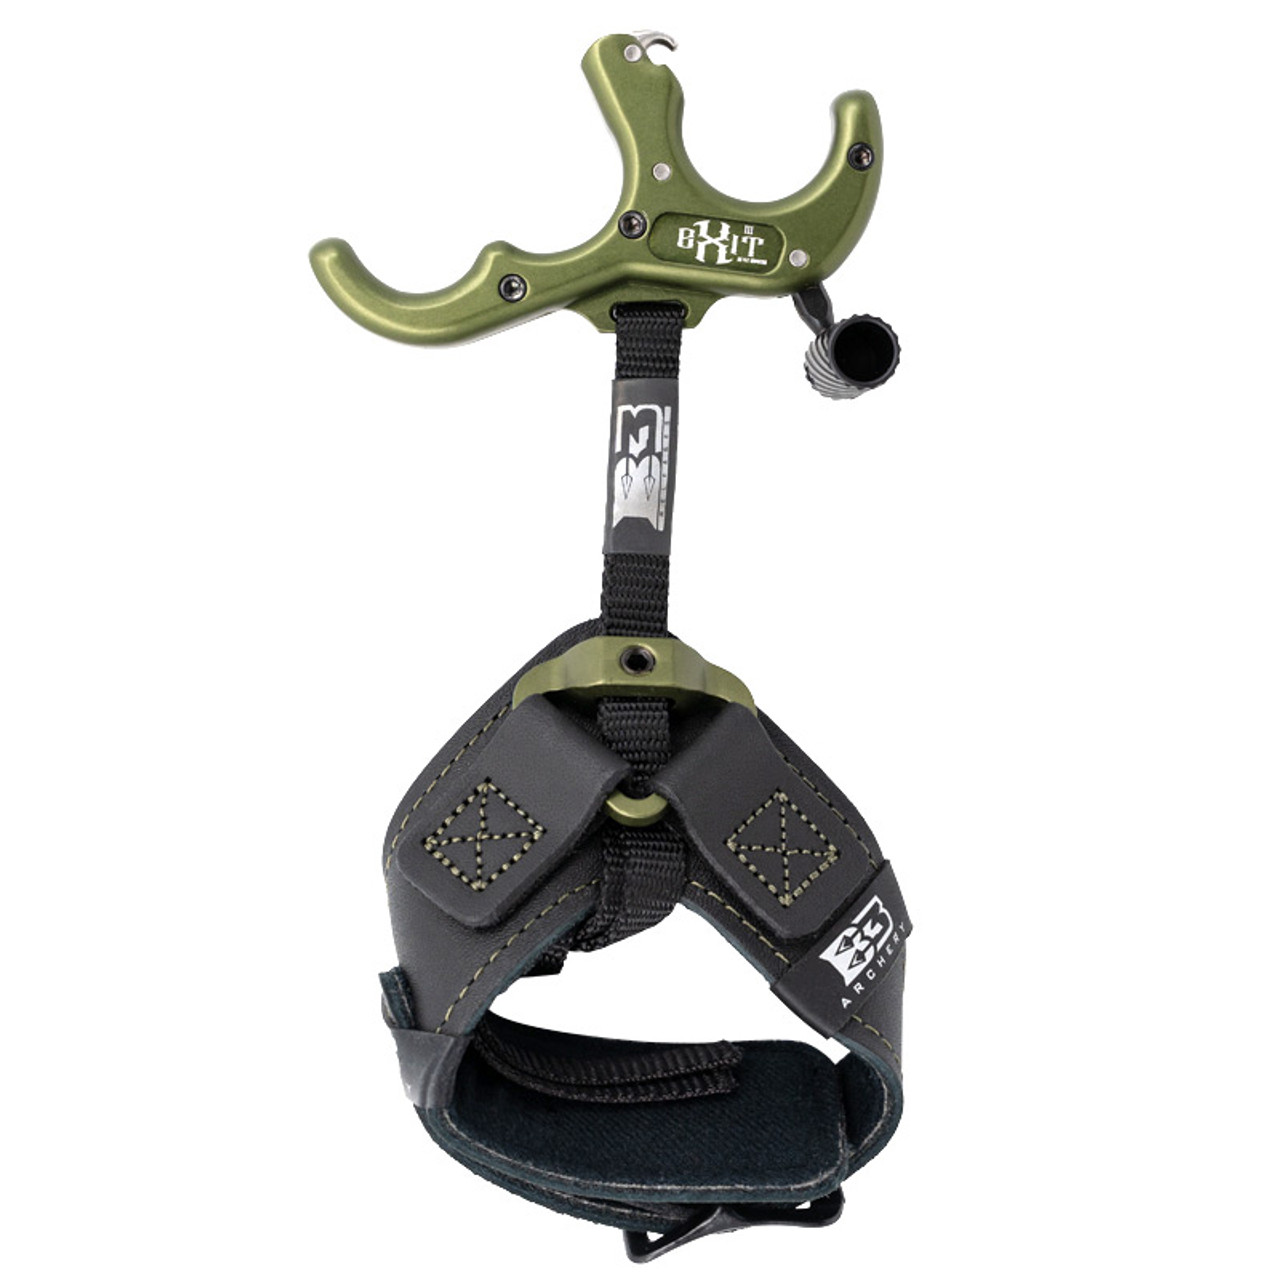 Exit Hunter OD Green Thumb Release by B3 Archery